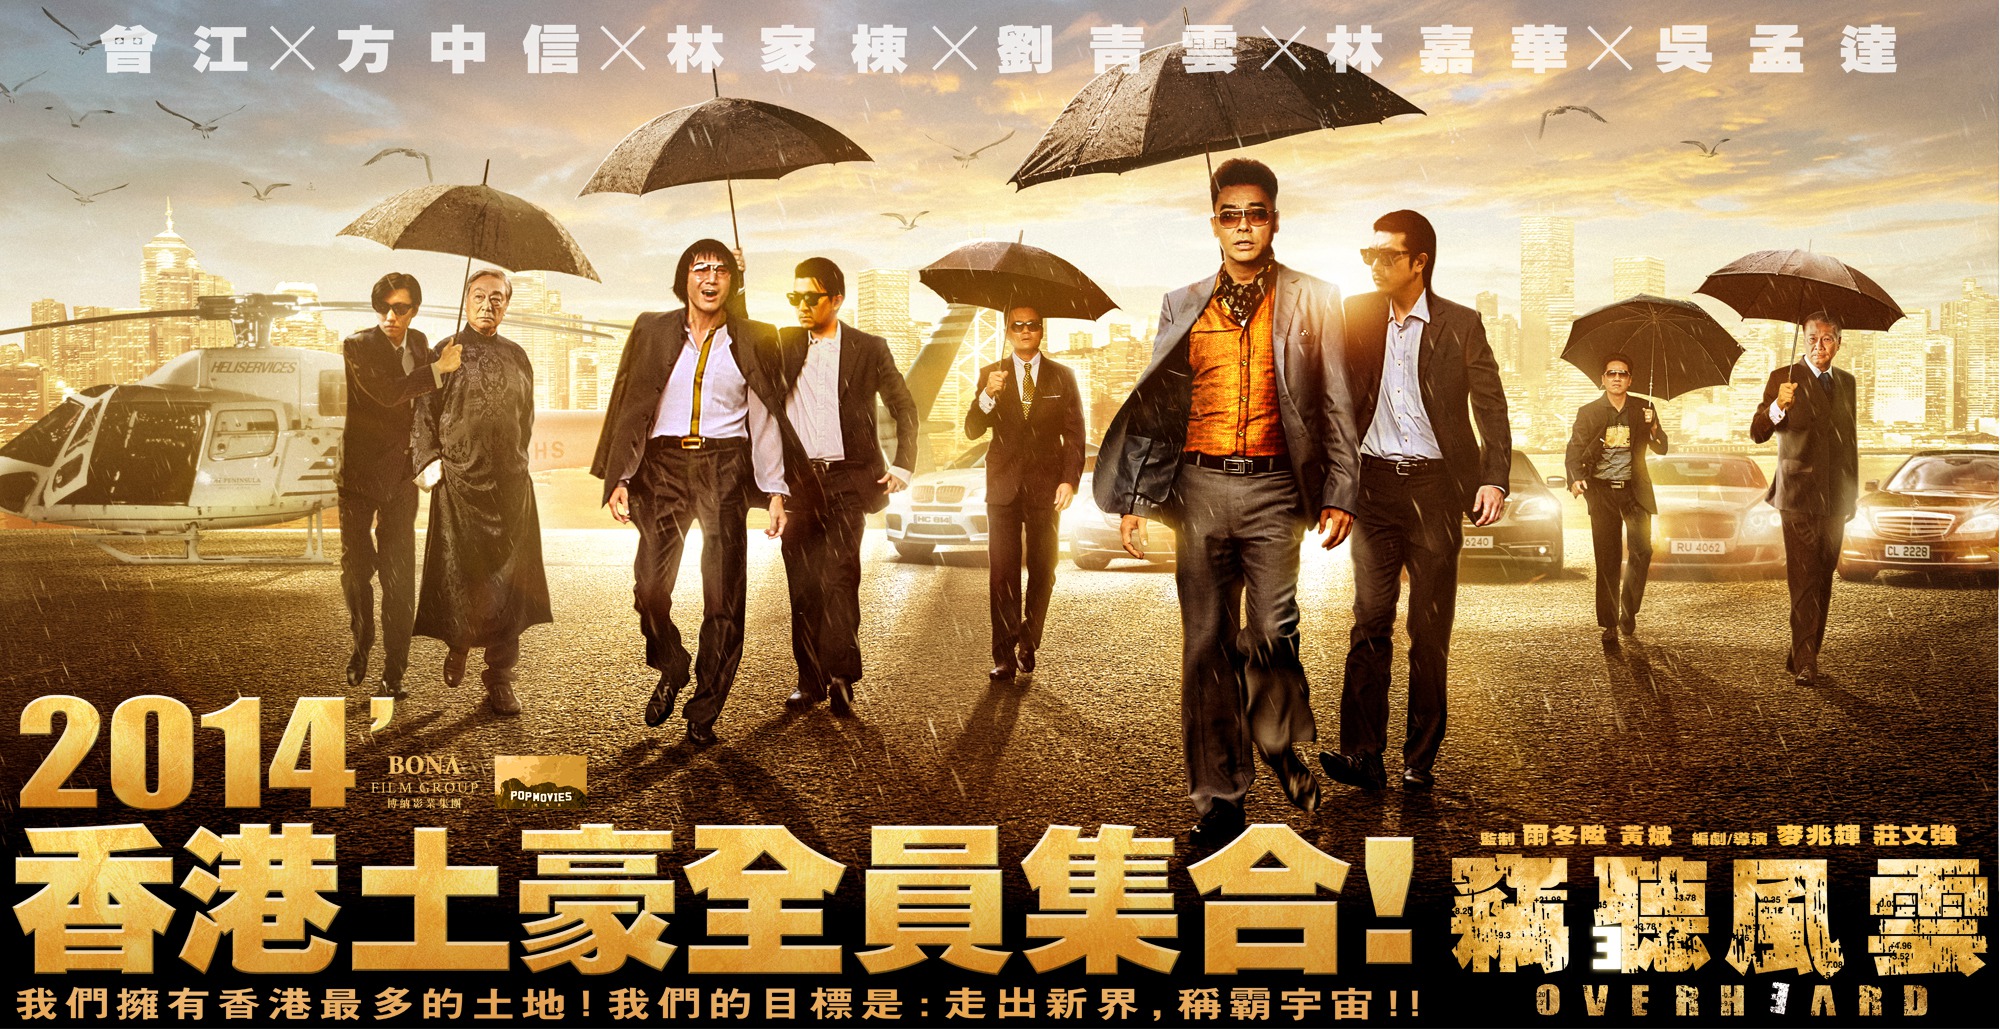 Mega Sized Movie Poster Image for Sit ting fung wan 3 (#5 of 7)